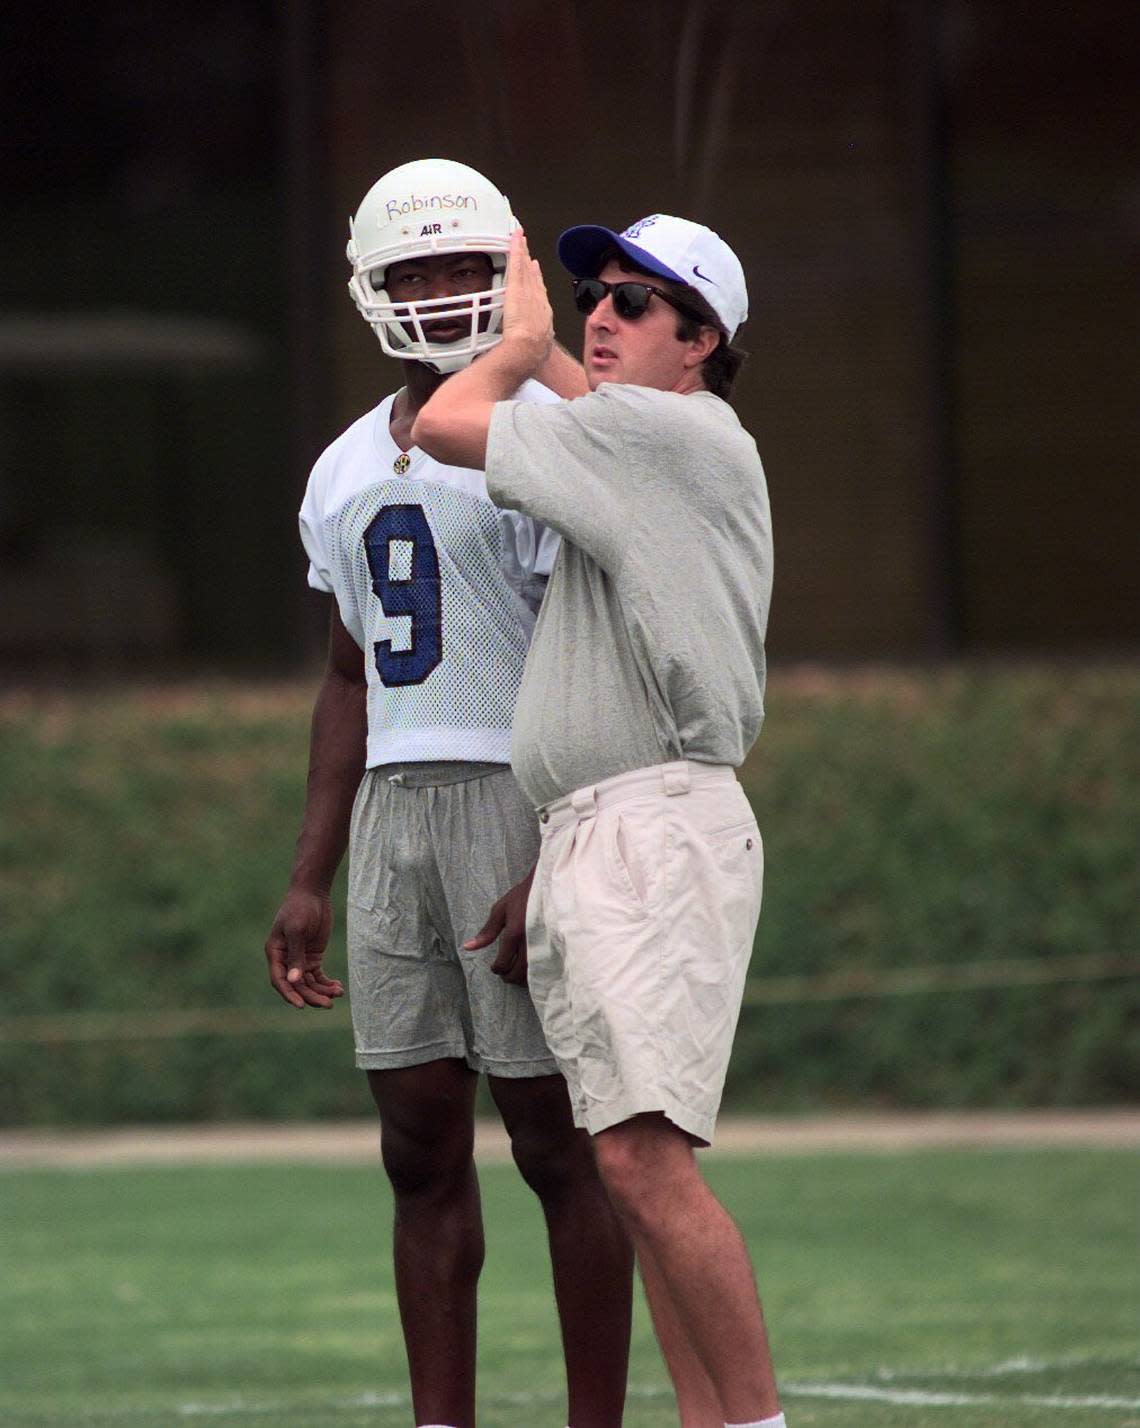 Mike Leach works with wide receiver Jimmy Robinson during a UK practice in 1997. Leach spent one season as wide receivers coach and one as offensive coordinator at Kentucky before leaving after the 1998 season to become offensive coordinator at Oklahoma.